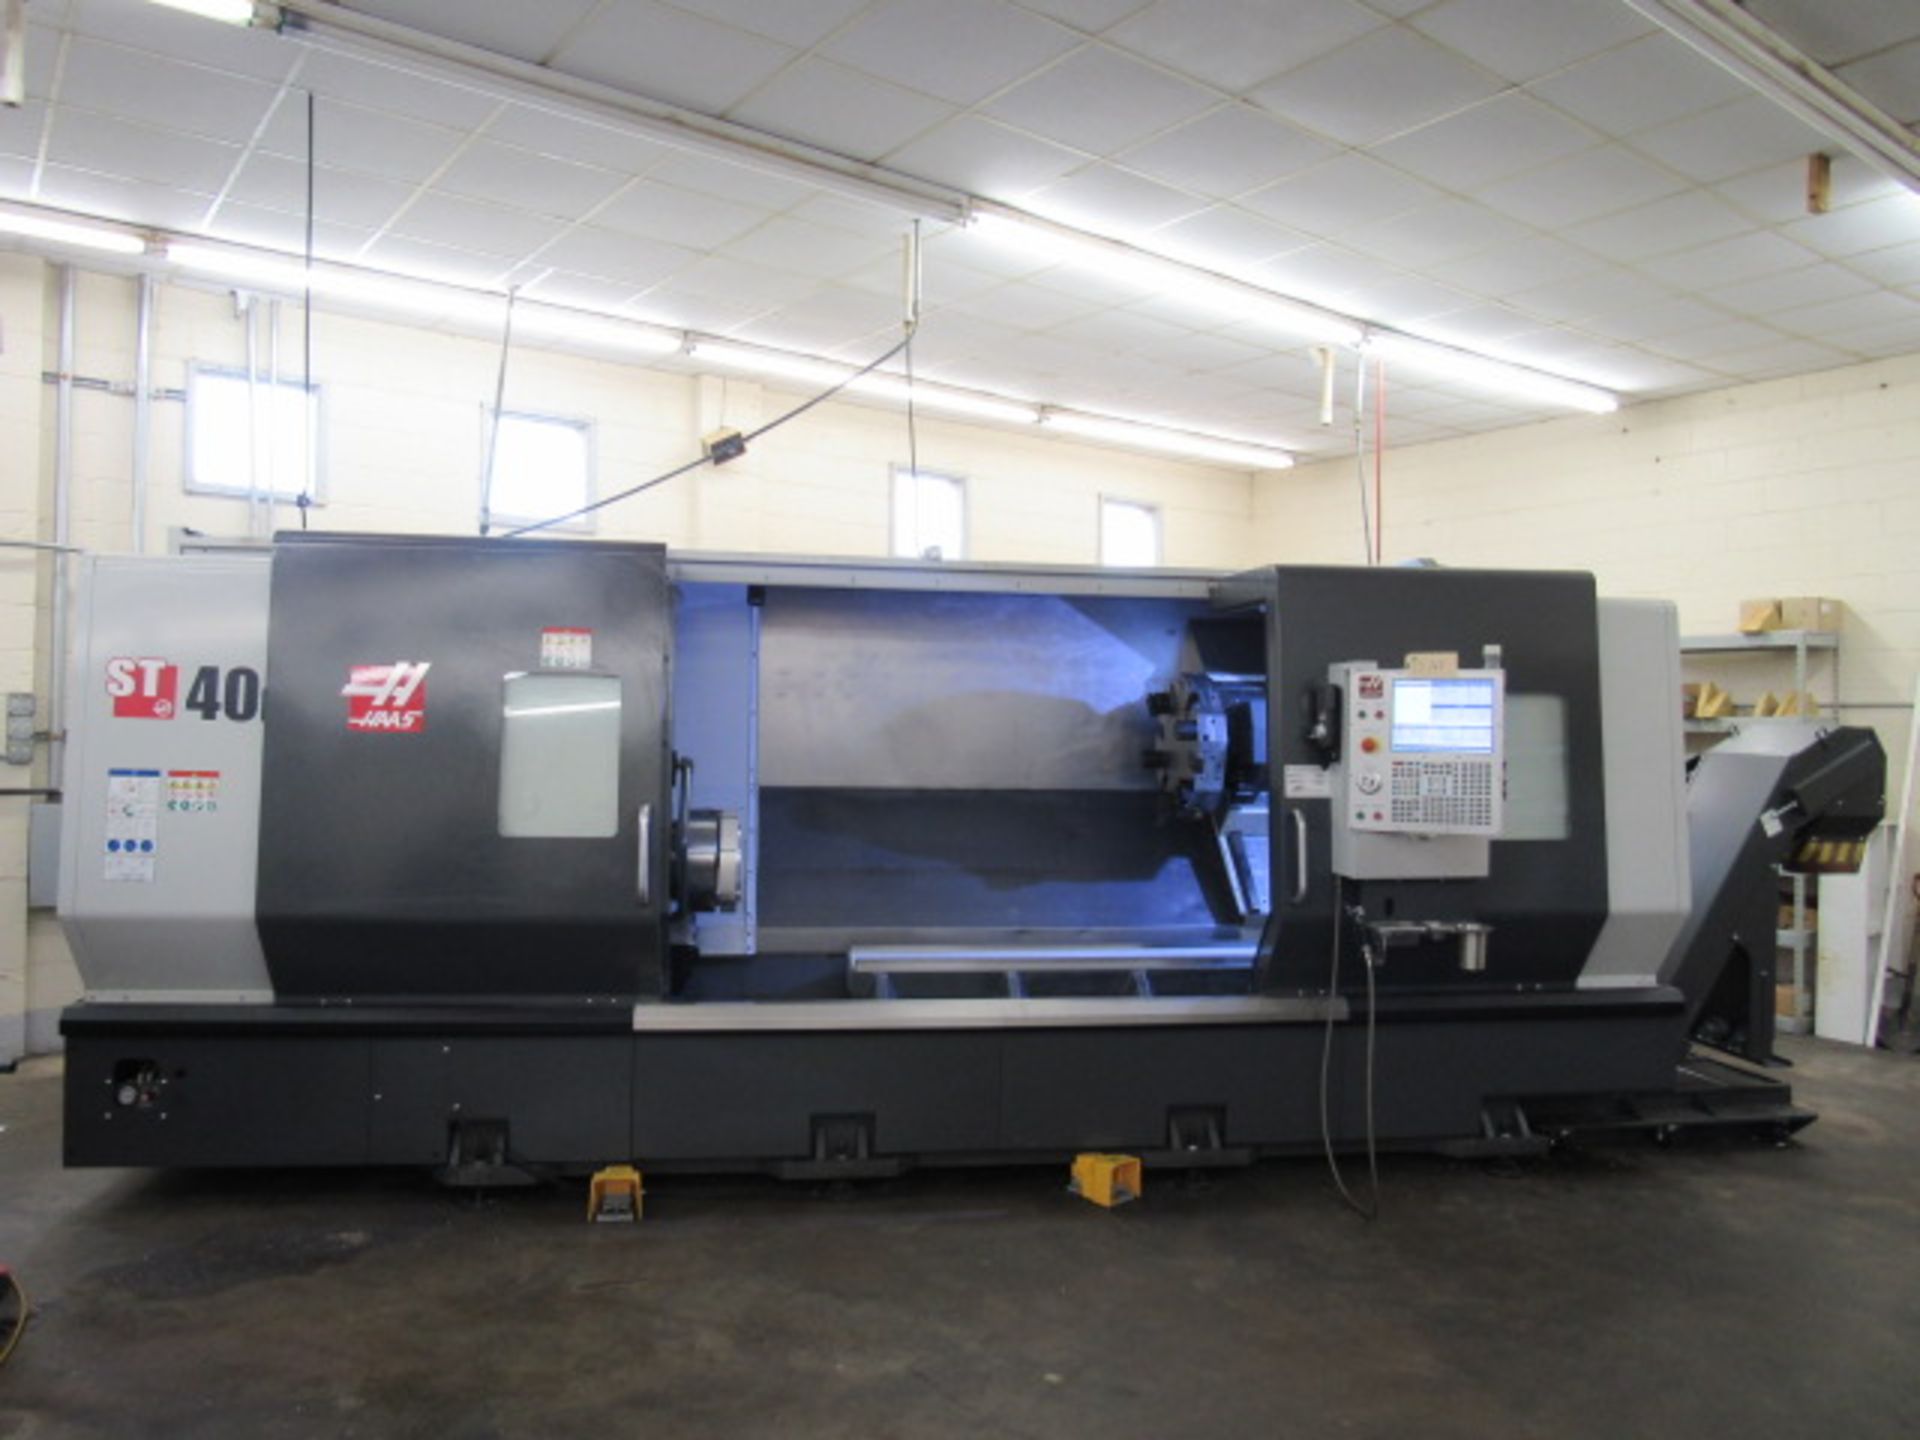 2020 HAAS ST-40L CNC Turning Center with Live Milling - Image 3 of 10